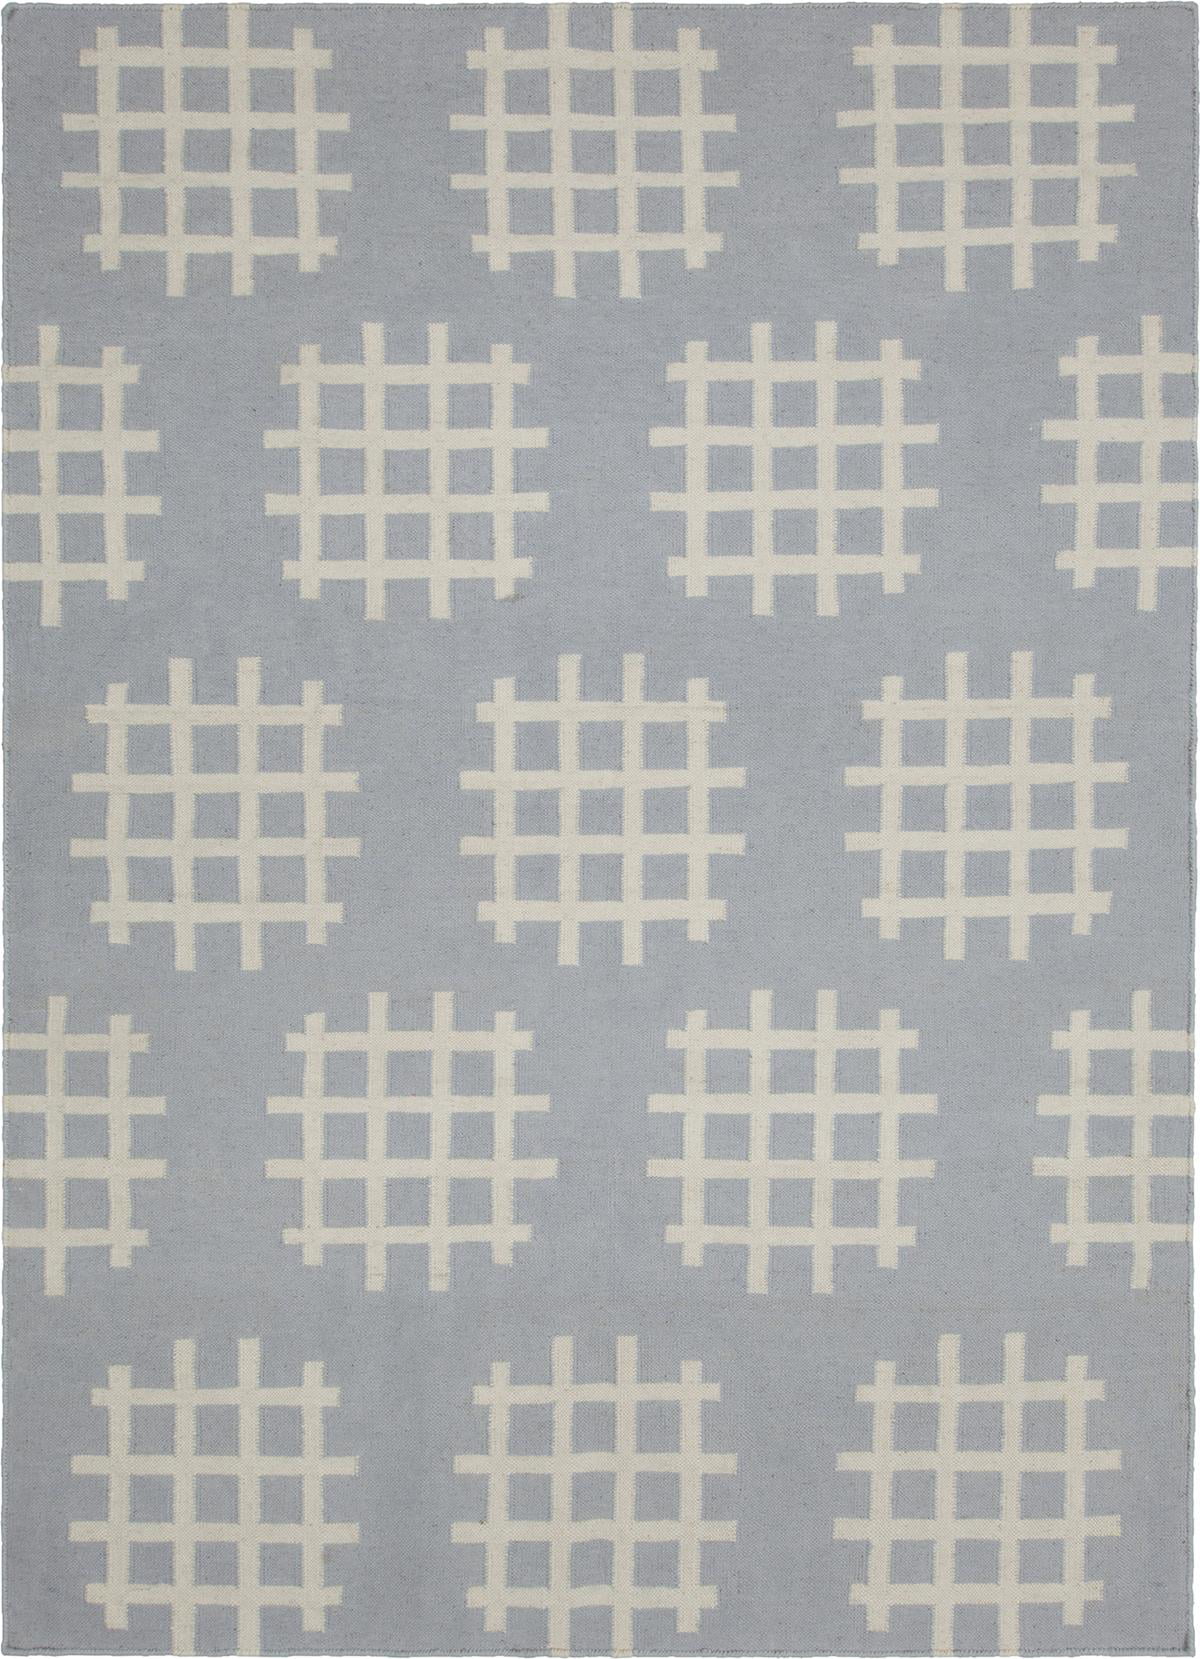 Casual Comfort Silvermist Banded Braided Rug44; Square Rhody Rug CC48R120X120S 10 ft 